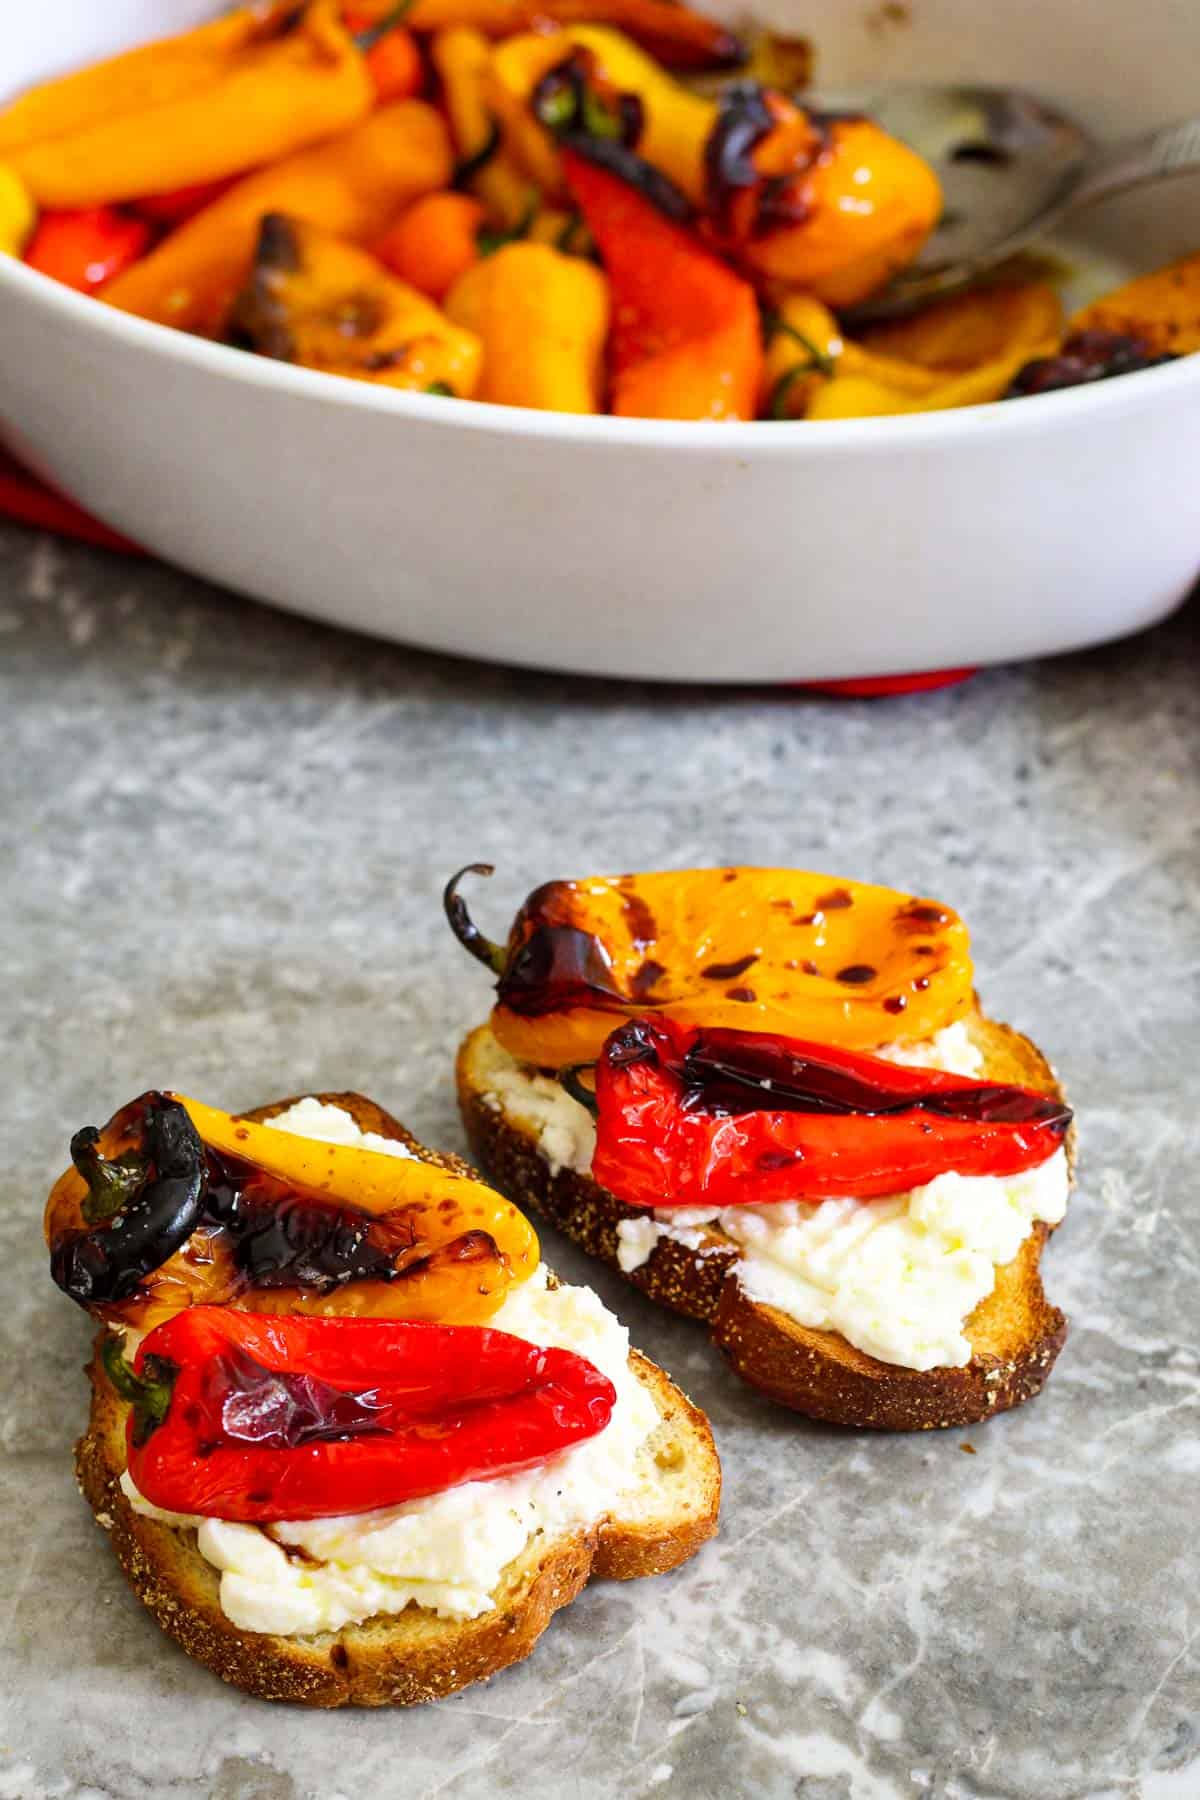 Toasted sourdough bread (2), topped with ricotta layer and over ricotta there's 2 roasted pepper on each toast. In the background, you see the baking dish for the peppers. 